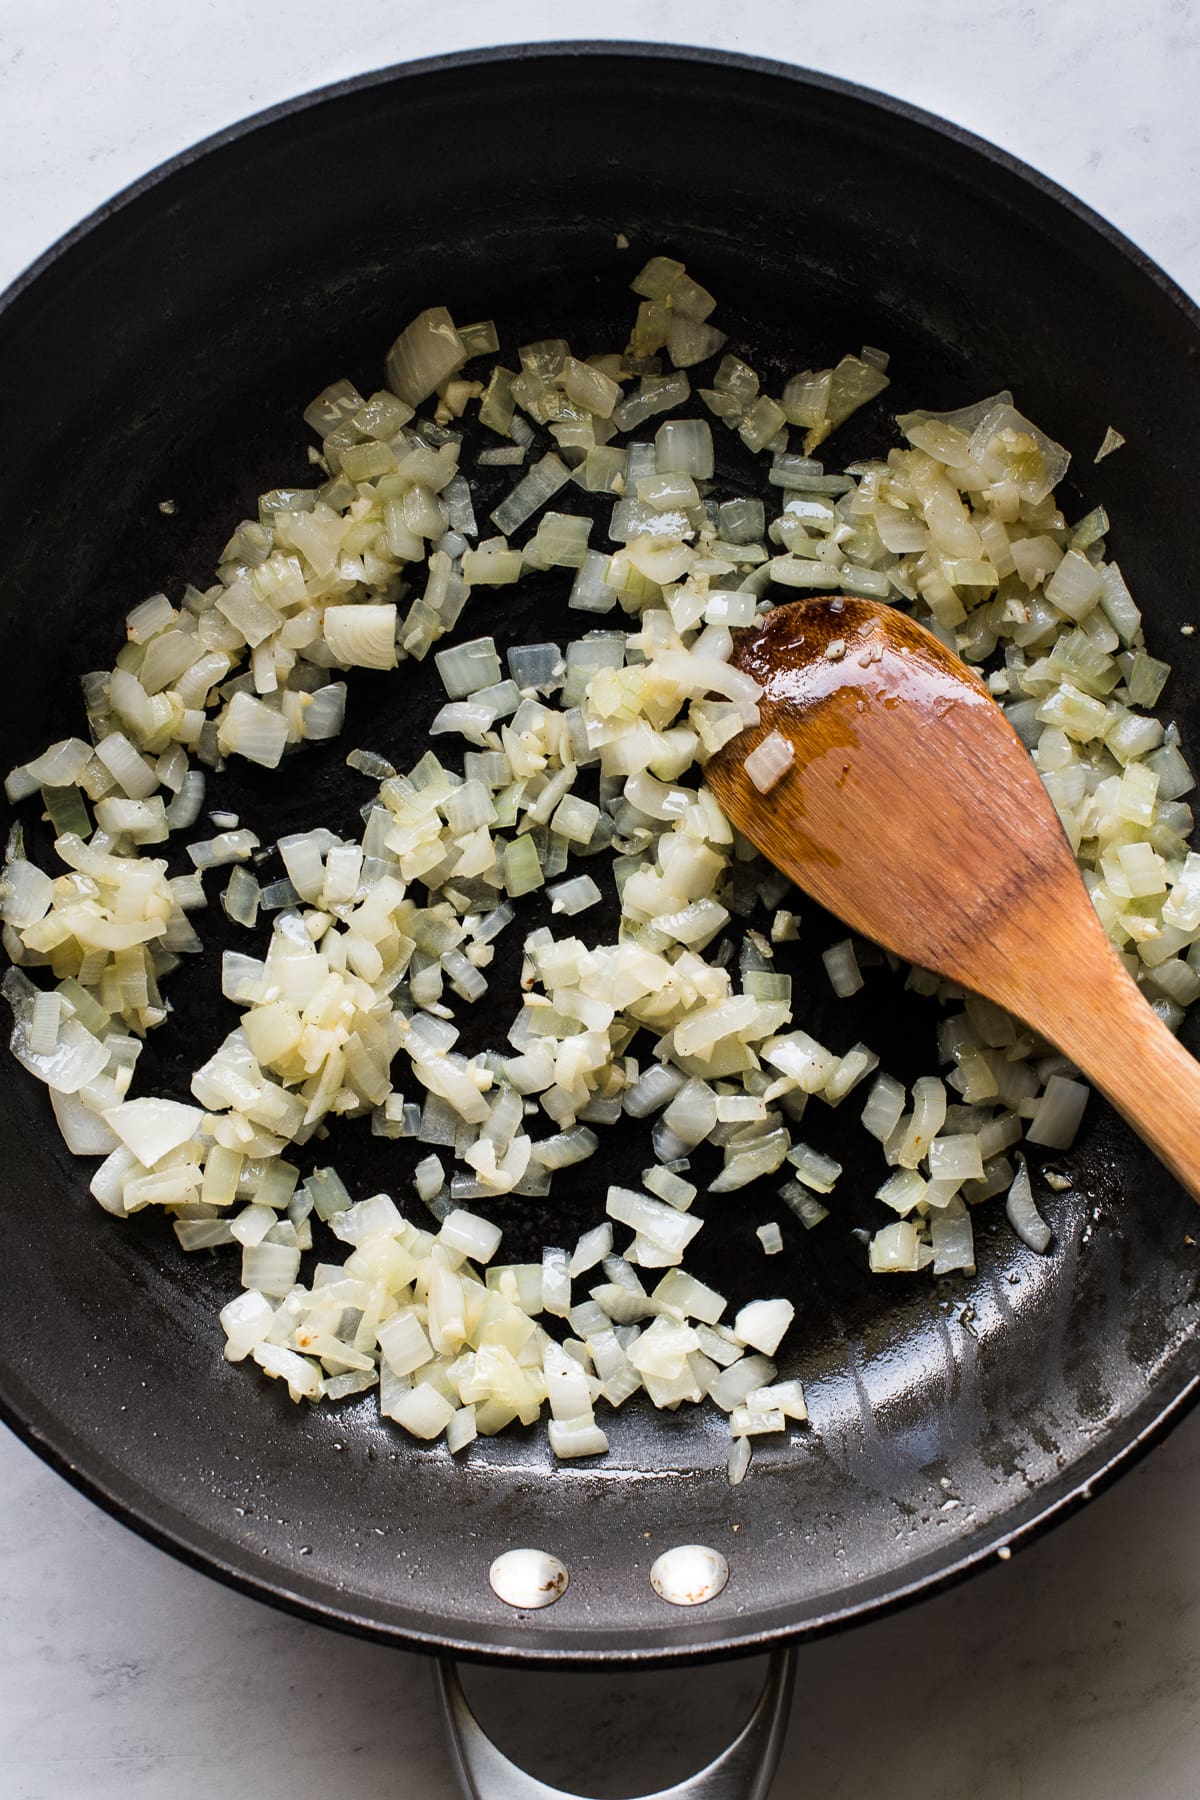 Onion and garlic sauteeing in a skillet.